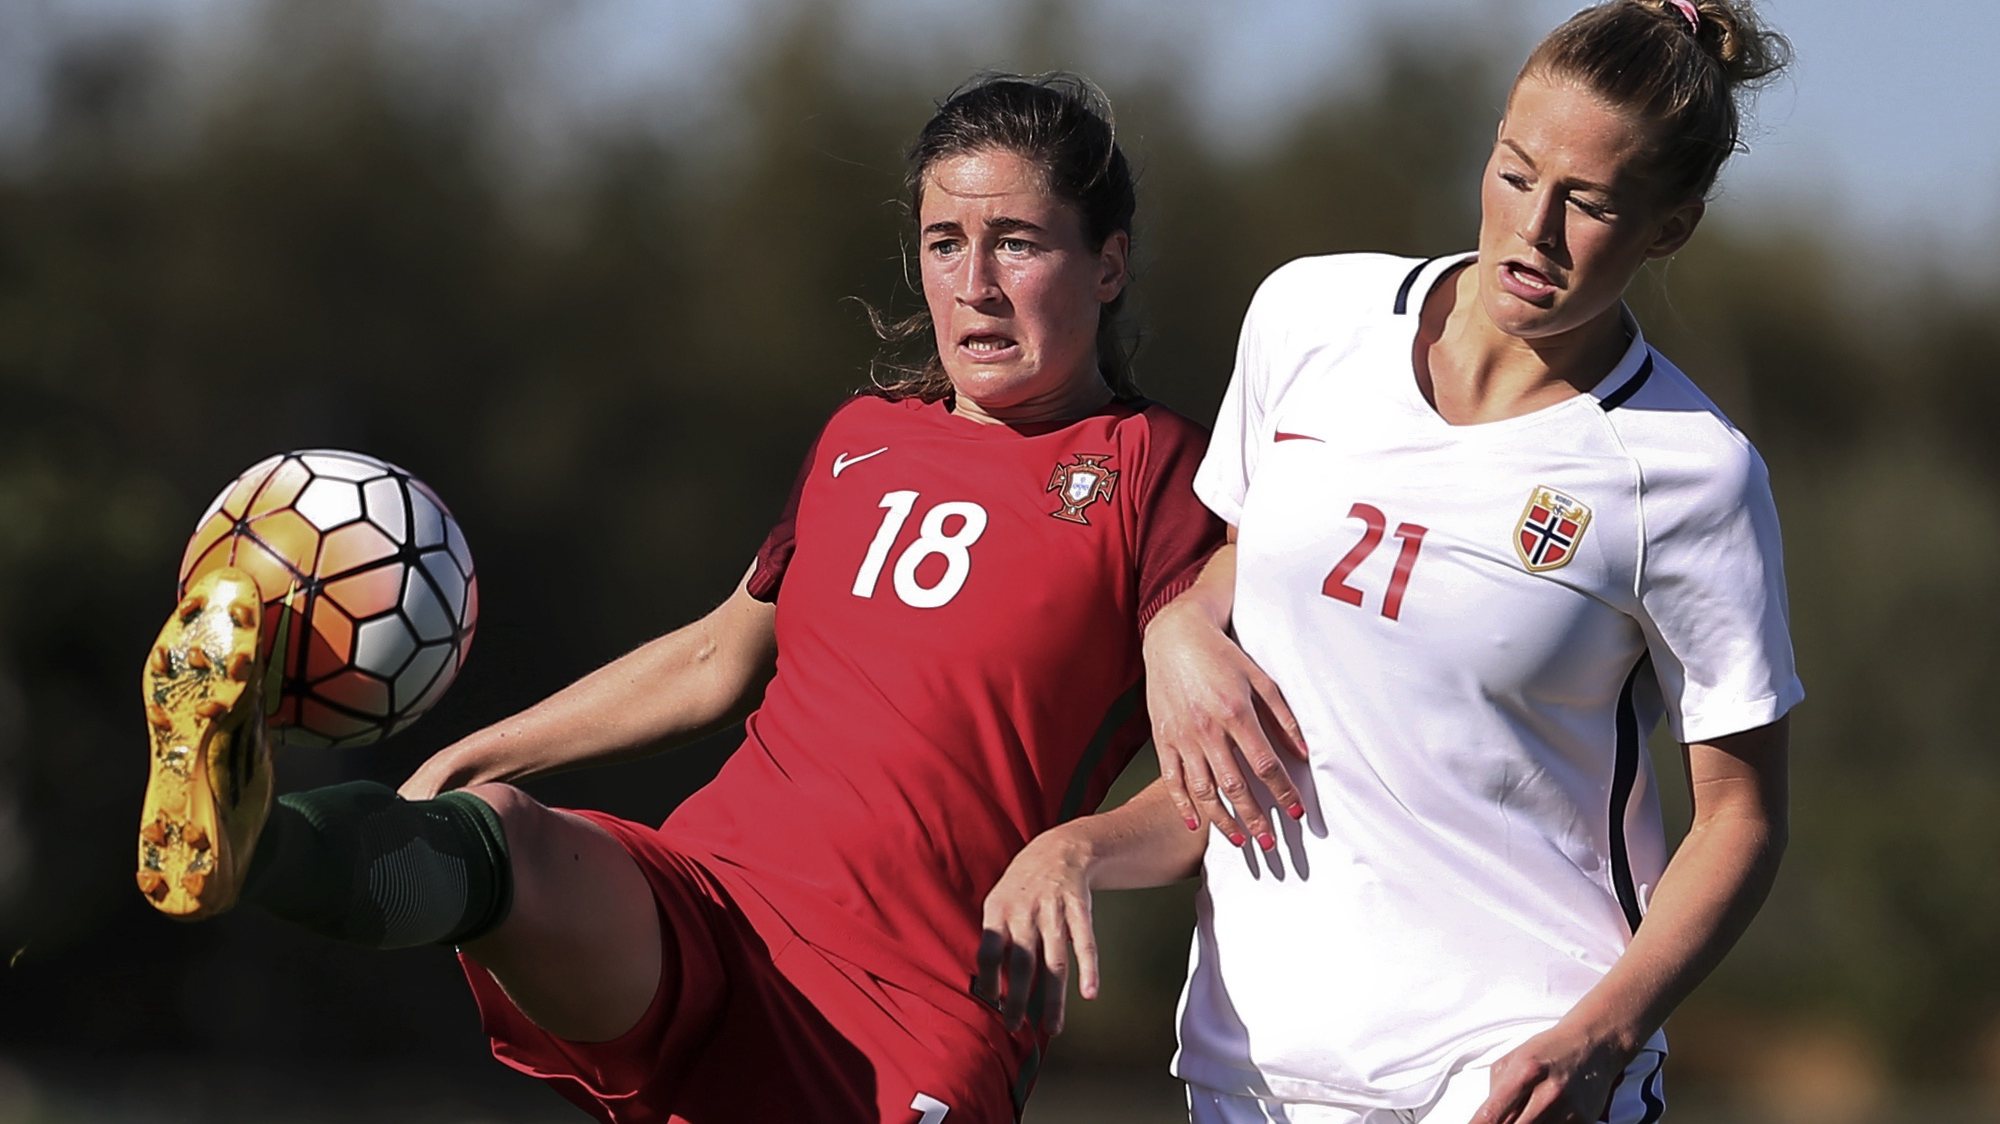 Portuguese player Carolina Mendes (L) and Norwegian Lisa - Marie Utland fight for the ball during the match at the Women Soccer Algarve Cup held at Bela Vista Stadium, Lagoa, Portugal, 08 March 2017. NUNO VEIGA/LUSA